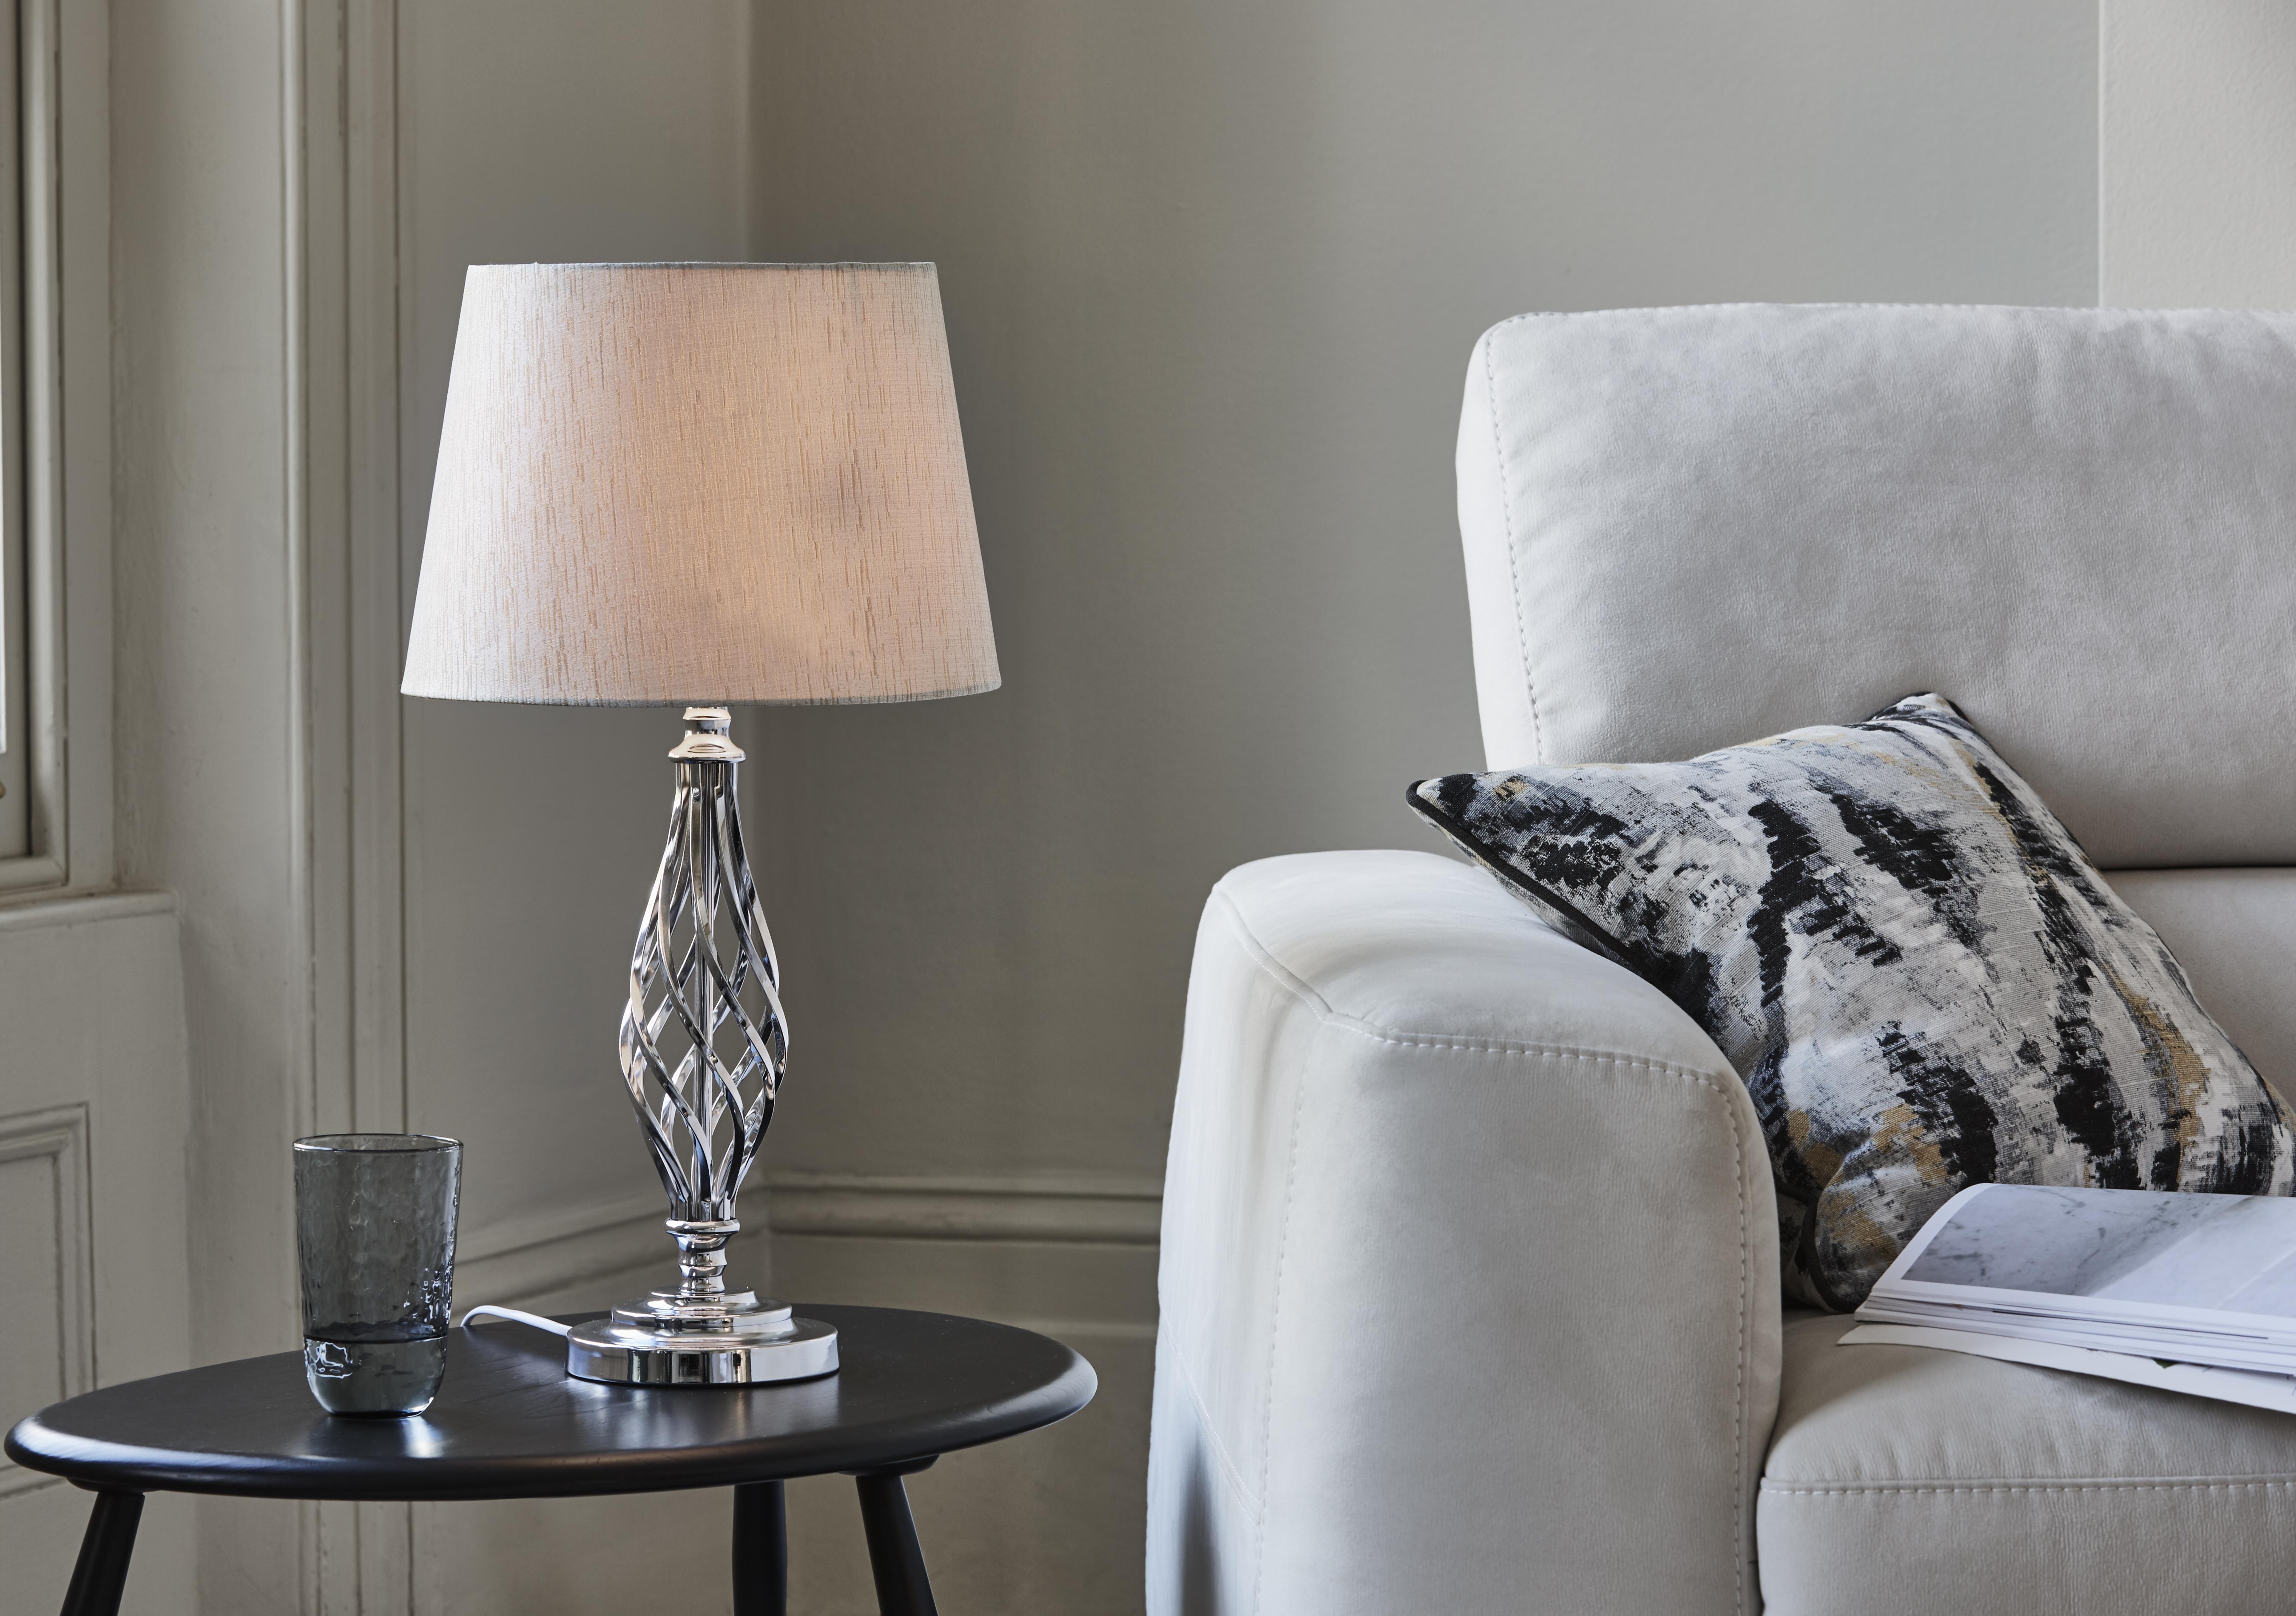 Jenna Chrome Table Lamp in  on Furniture Village